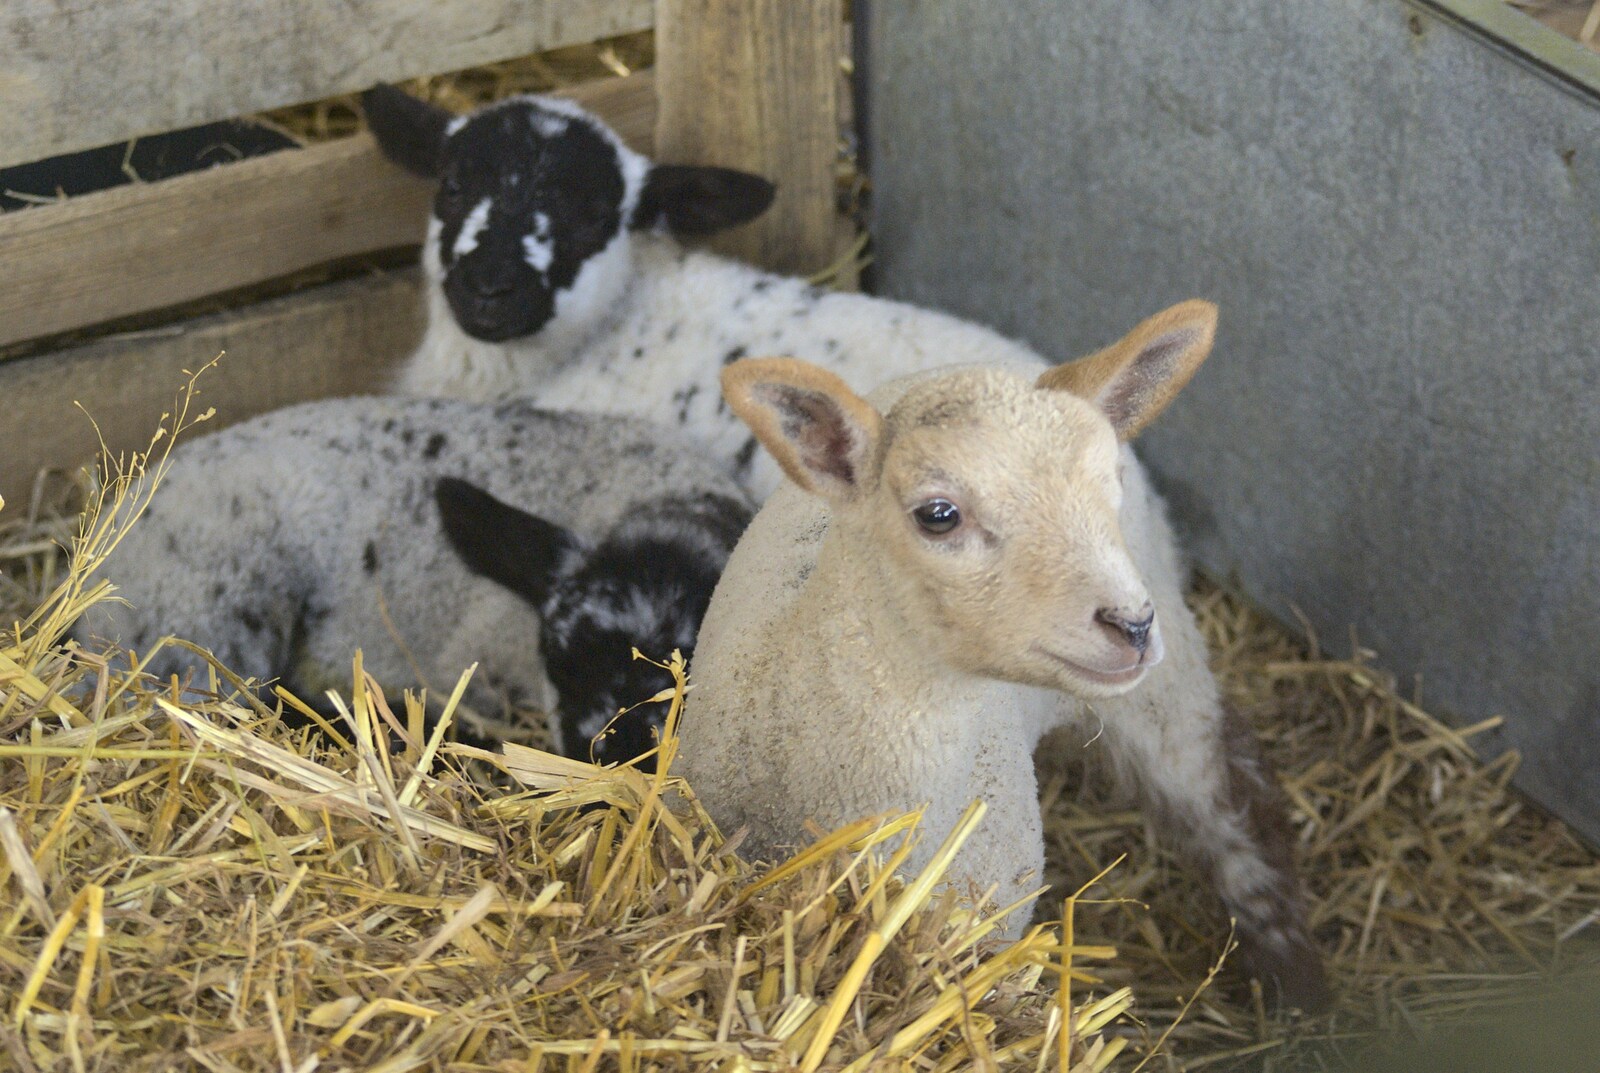 Lambs in straw from Easter in Chagford and Hoo Meavy, Devon - 3rd April 2010